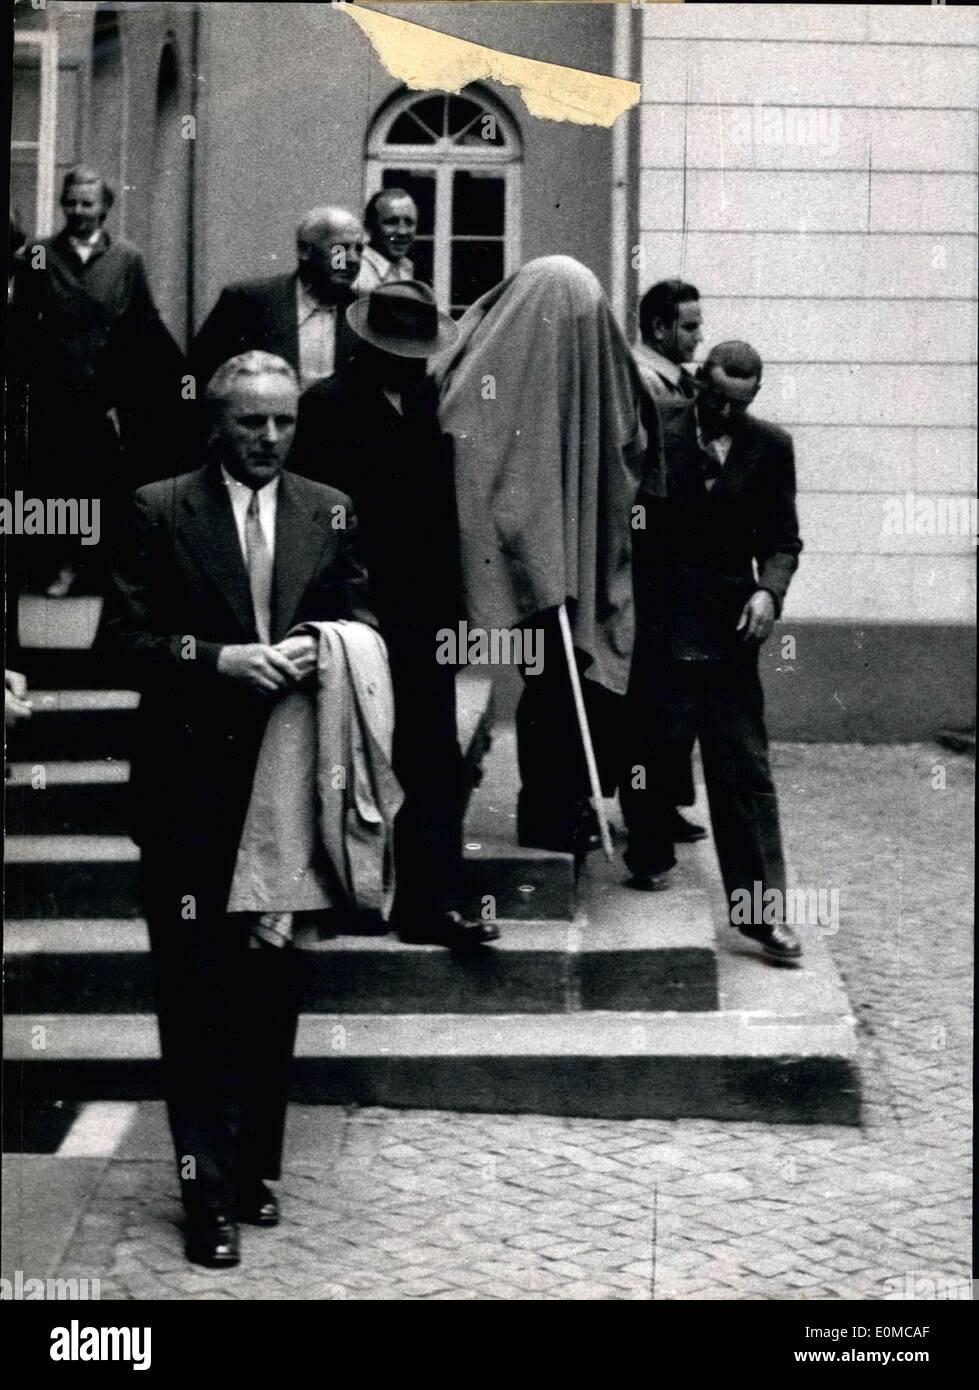 Jun. 19, 1954 - Pictured here, hiding his face, is Gustav Scholling, a blind 60 year old who is in court for ''killing'' his life companion 69 year old Magdalena Jonissek, who was suffering from severe meningitis. Magdalena wished to be killed to escape the pain. The court imposed the lightest sentence of two months in jail for him. He wrapped a noose around her neck and performed the act. Scholling is shown here with a coat over his head as he left the court building. Stock Photo